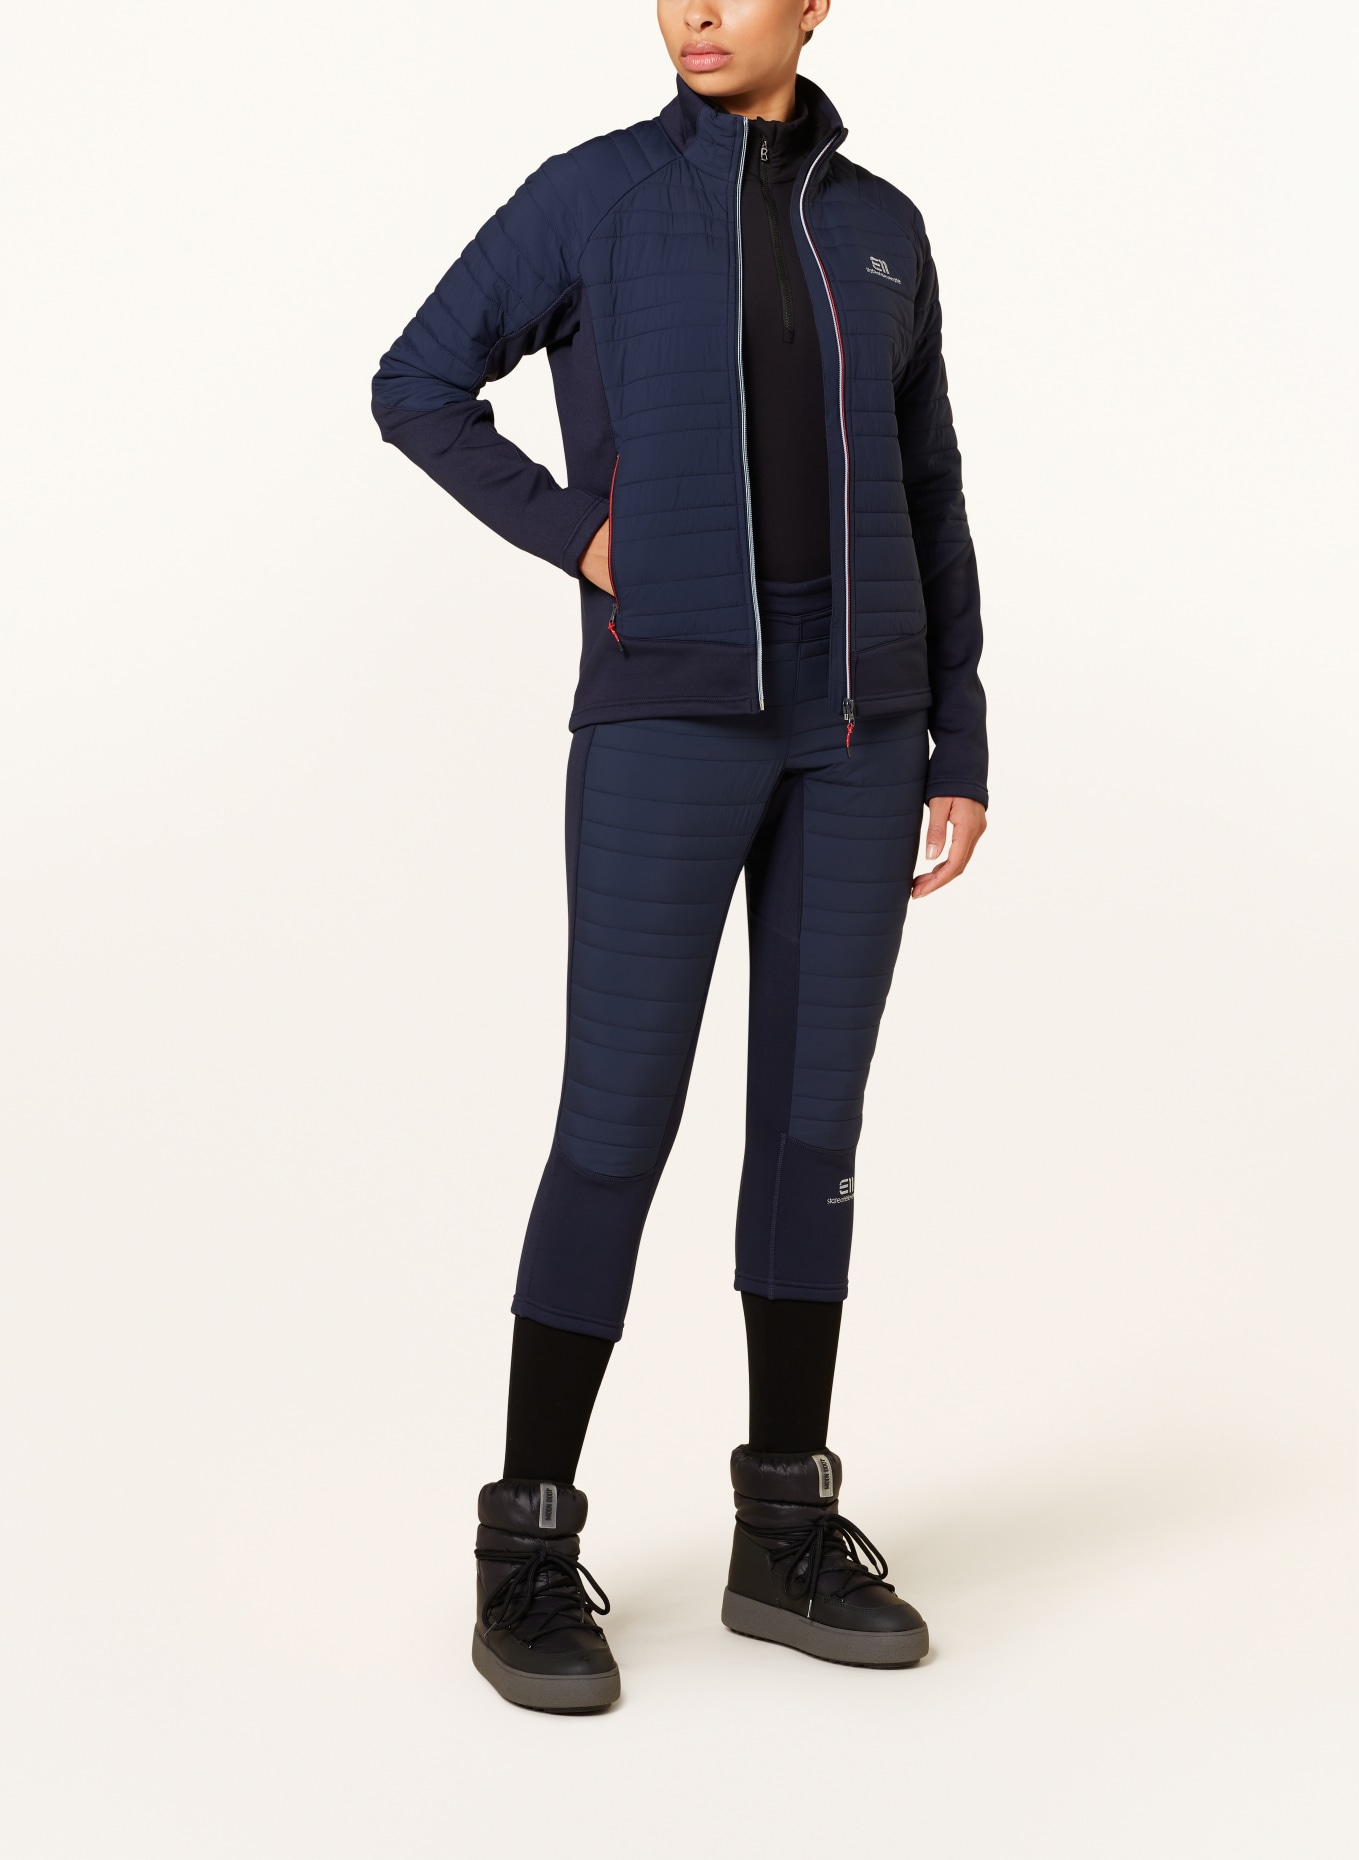 state of elevenate Mid-layer jacket FUSION in dark blue